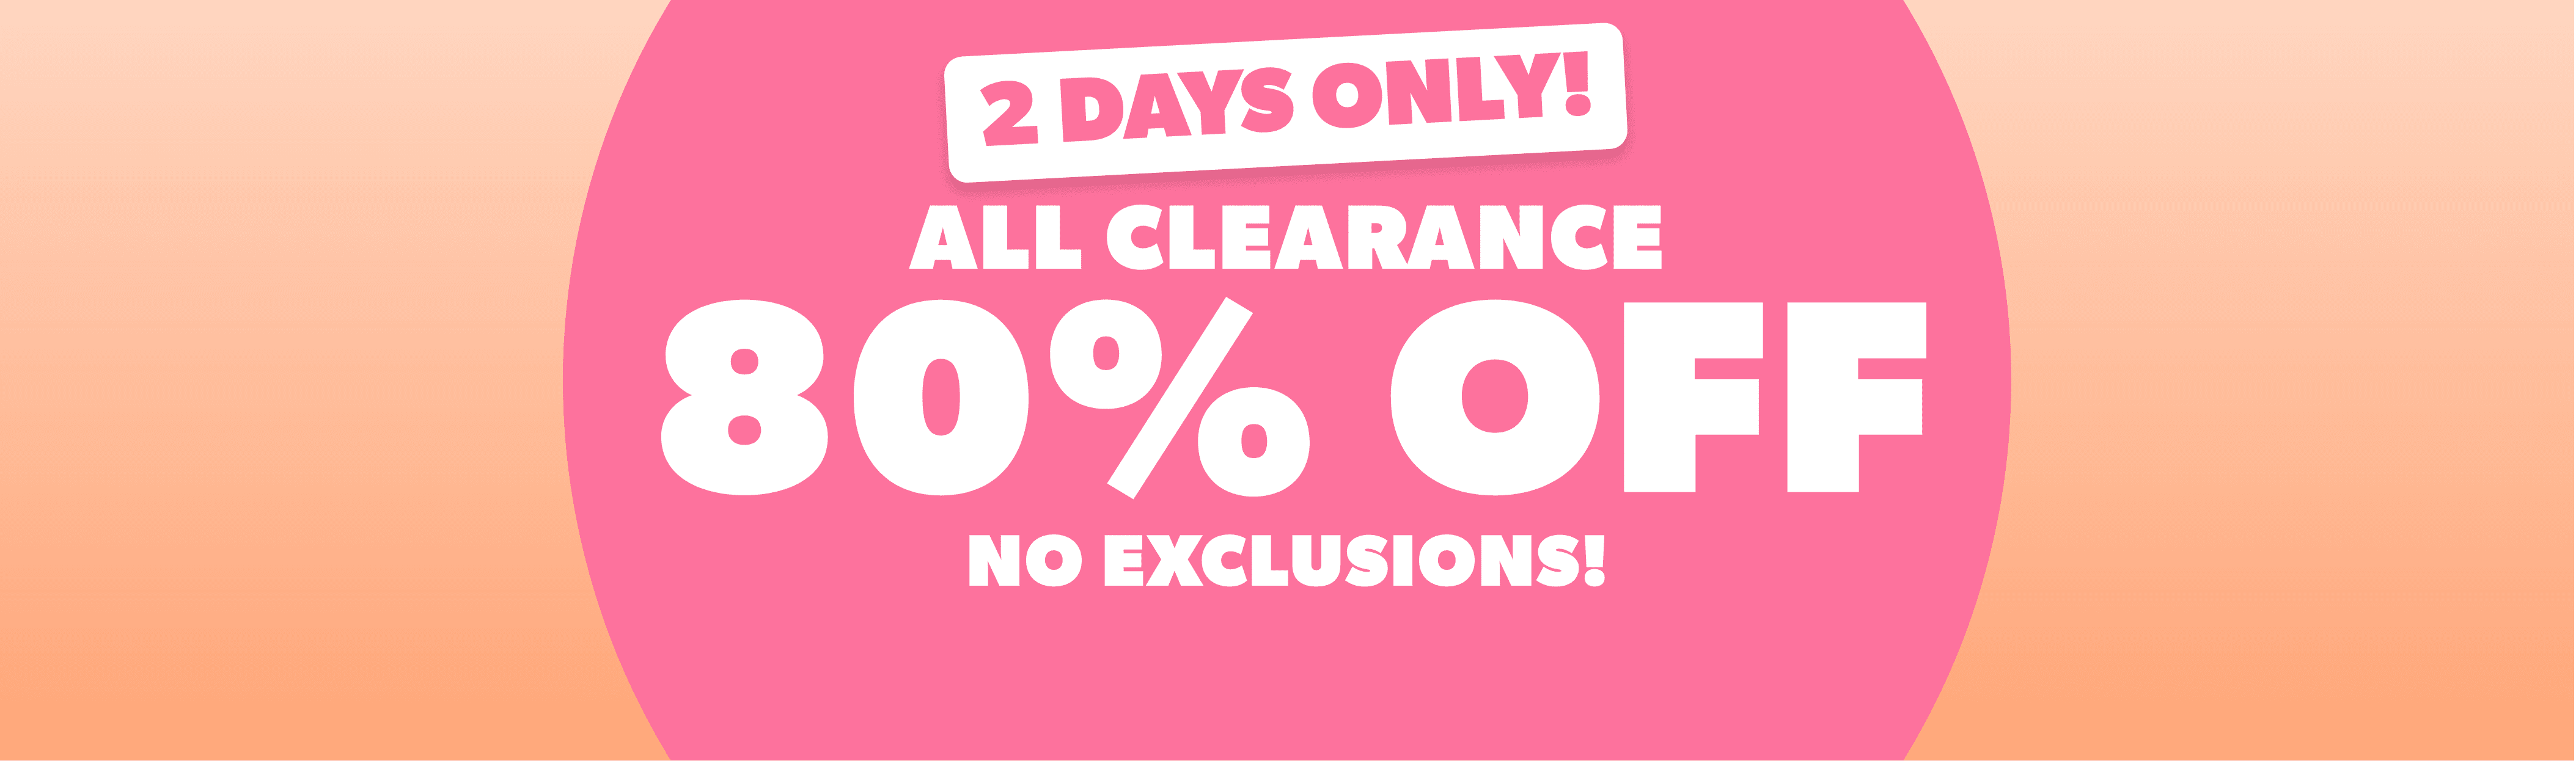 2 Days Only ALL CLEARANCE 80% Off NO EXCLUSIONS!